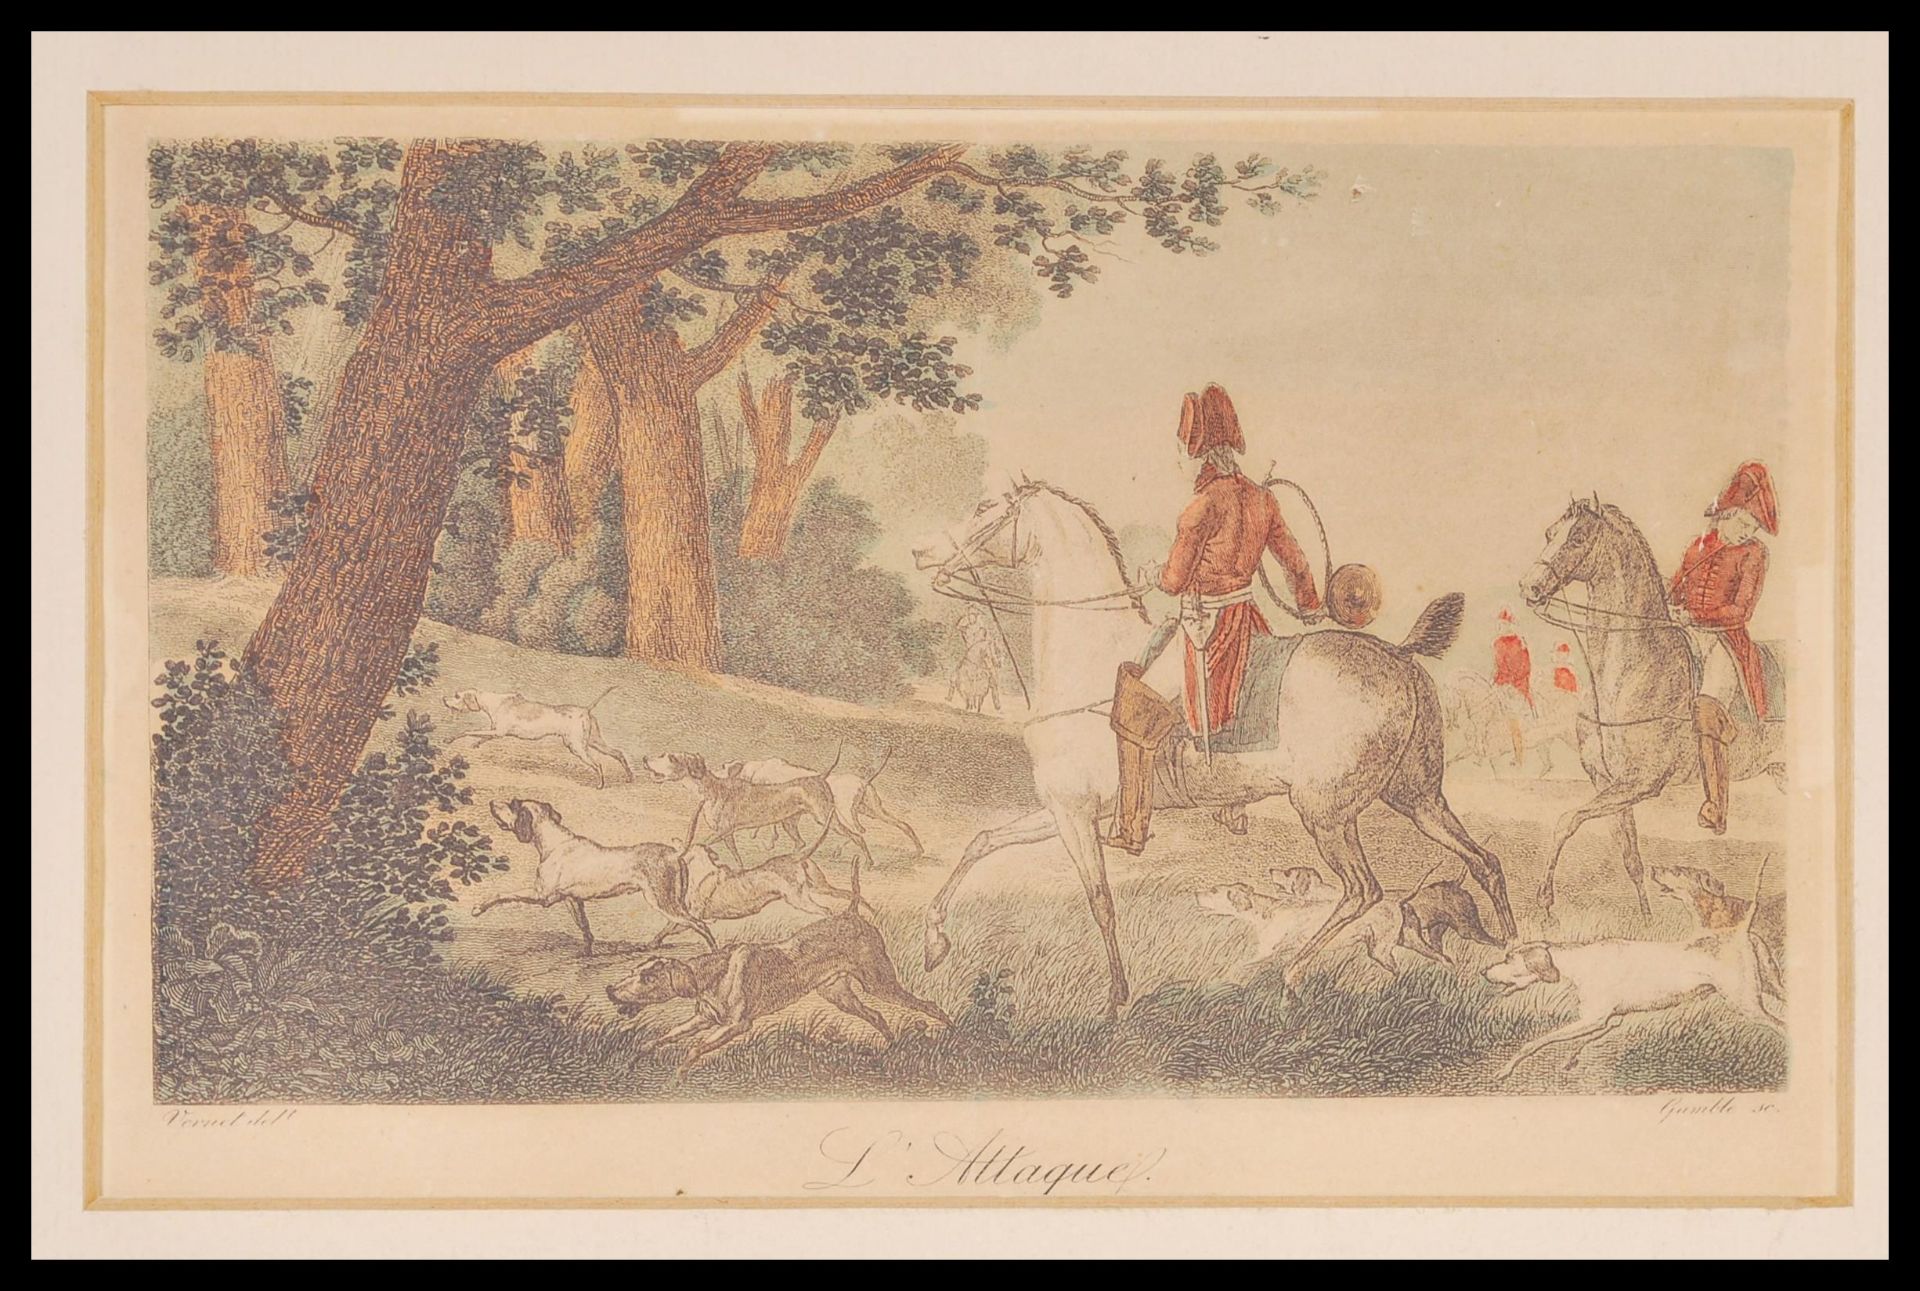 A 20th Century aged print on canvas depicting two native american figures on horse back having